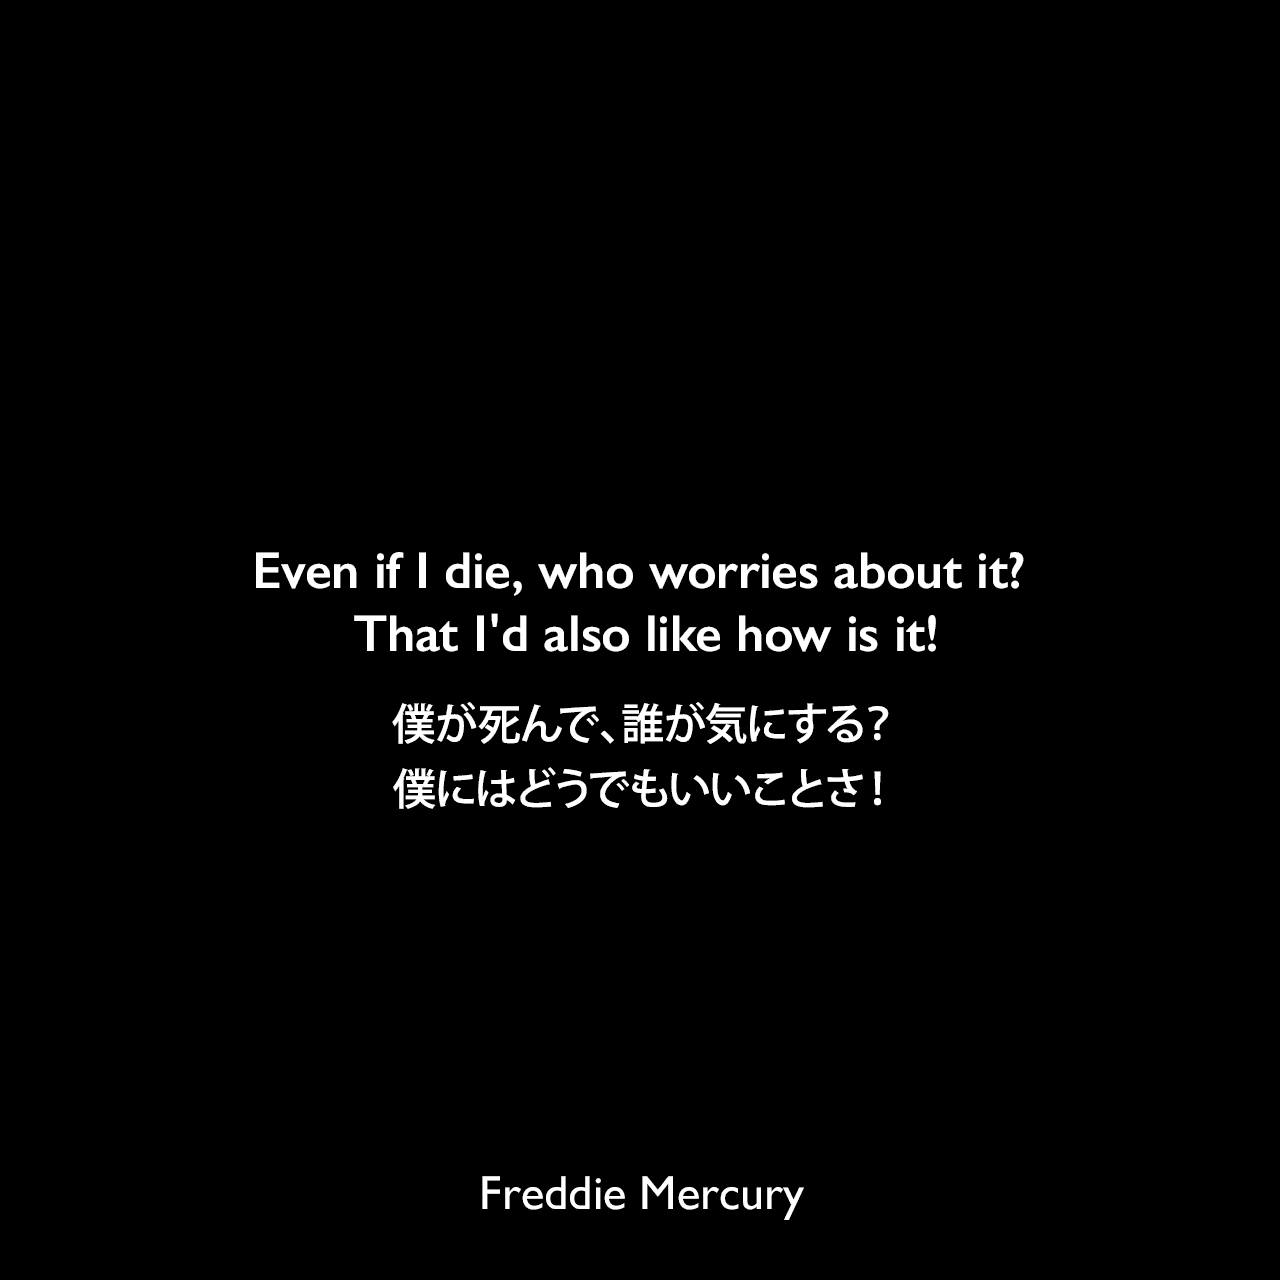 Even if I die, who worries about it? That I'd also like how is it!僕が死んで、誰が気にする？ 僕にはどうでもいいことさ！Freddie Mercury